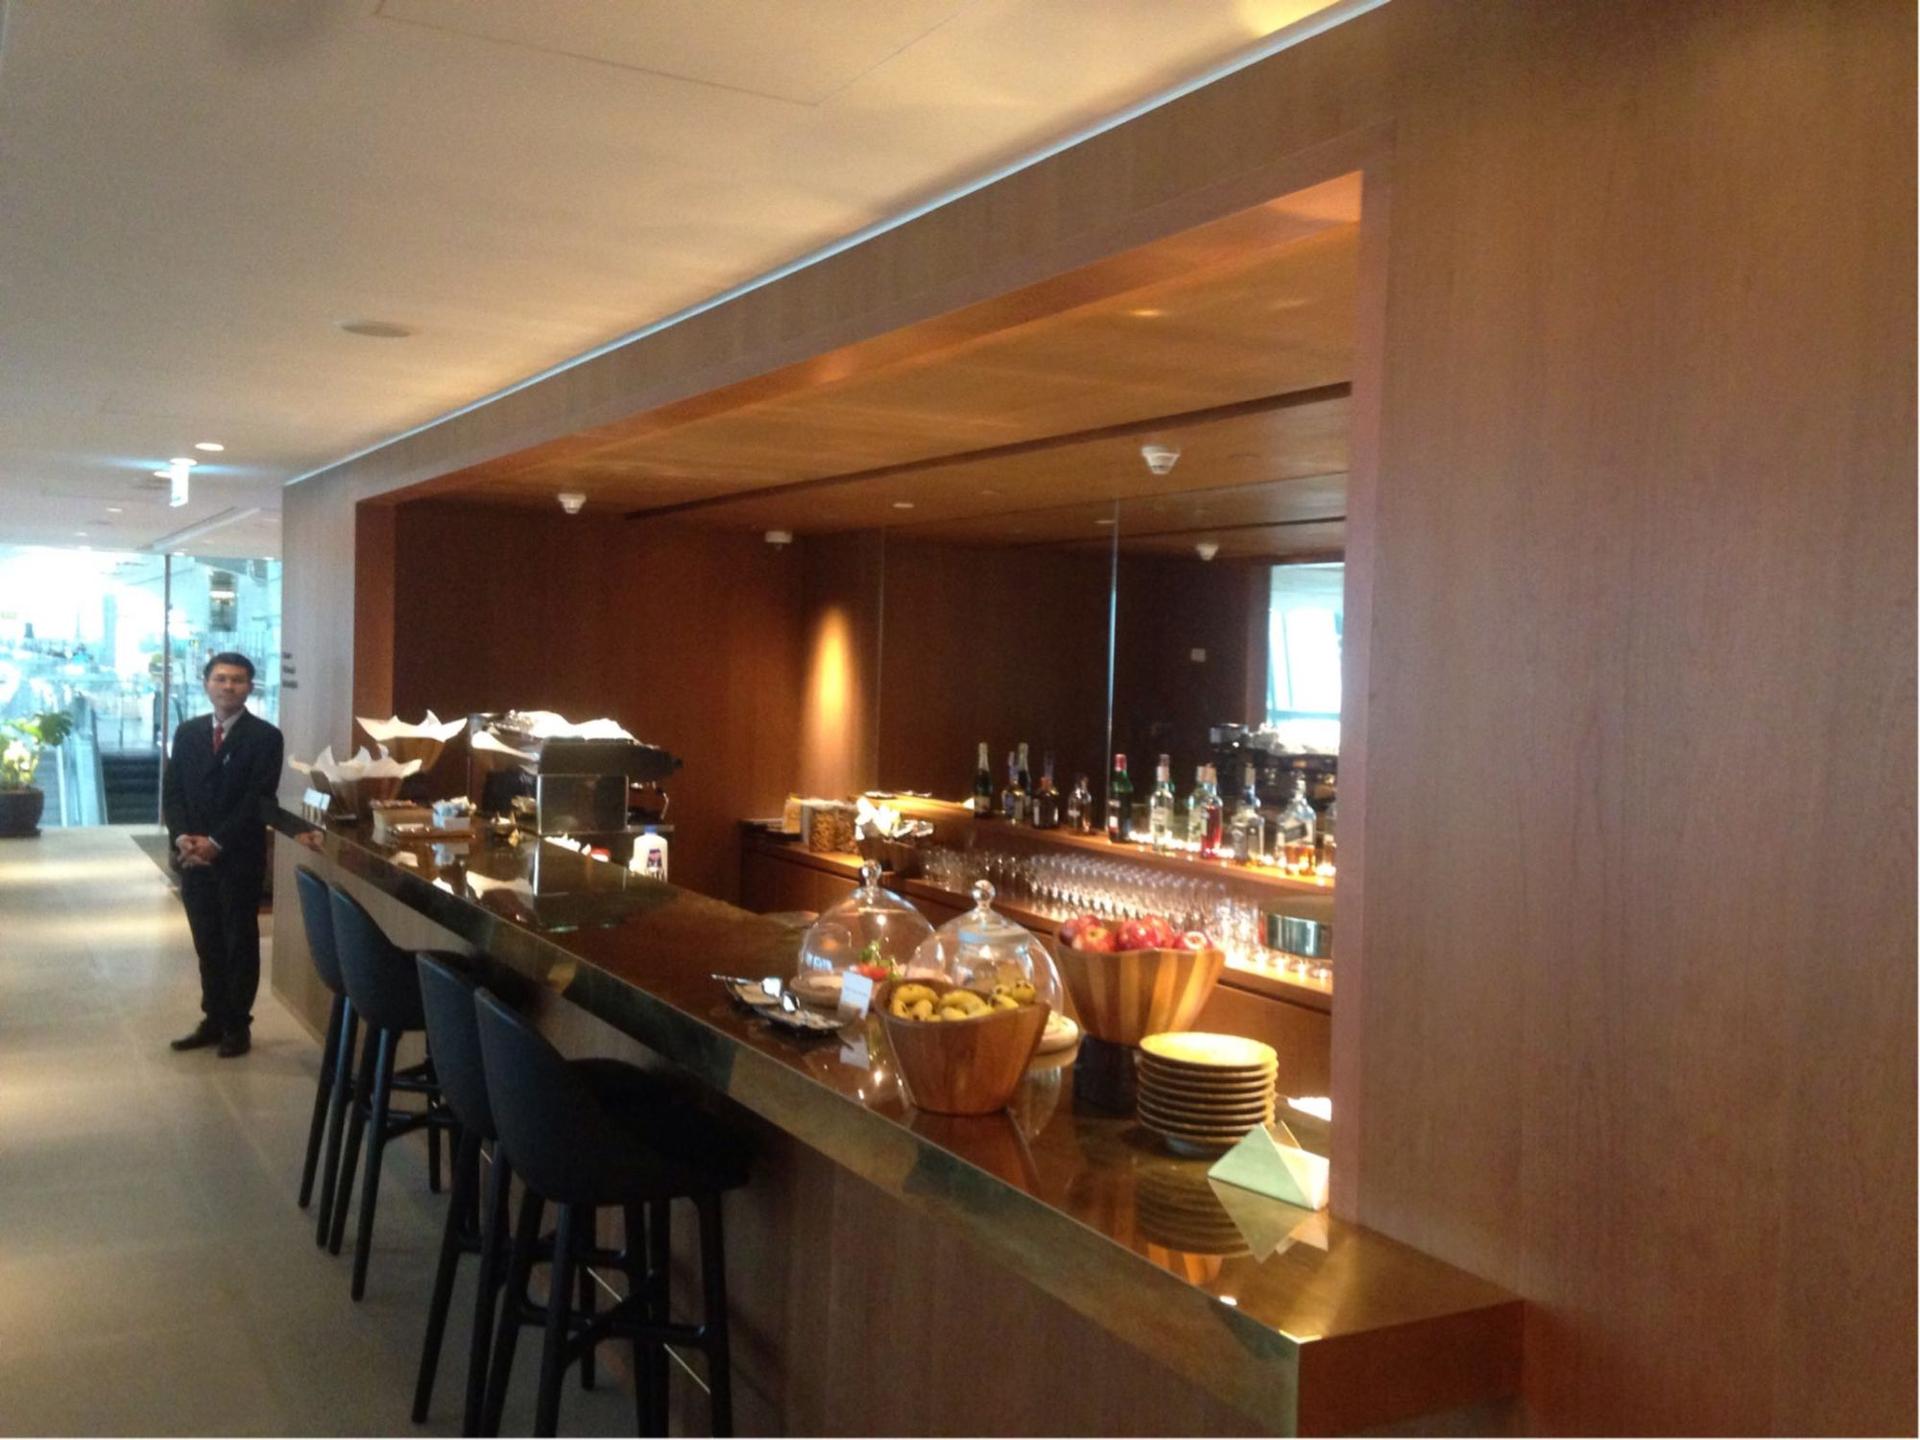 Cathay Pacific First and Business Class Lounge image 24 of 69